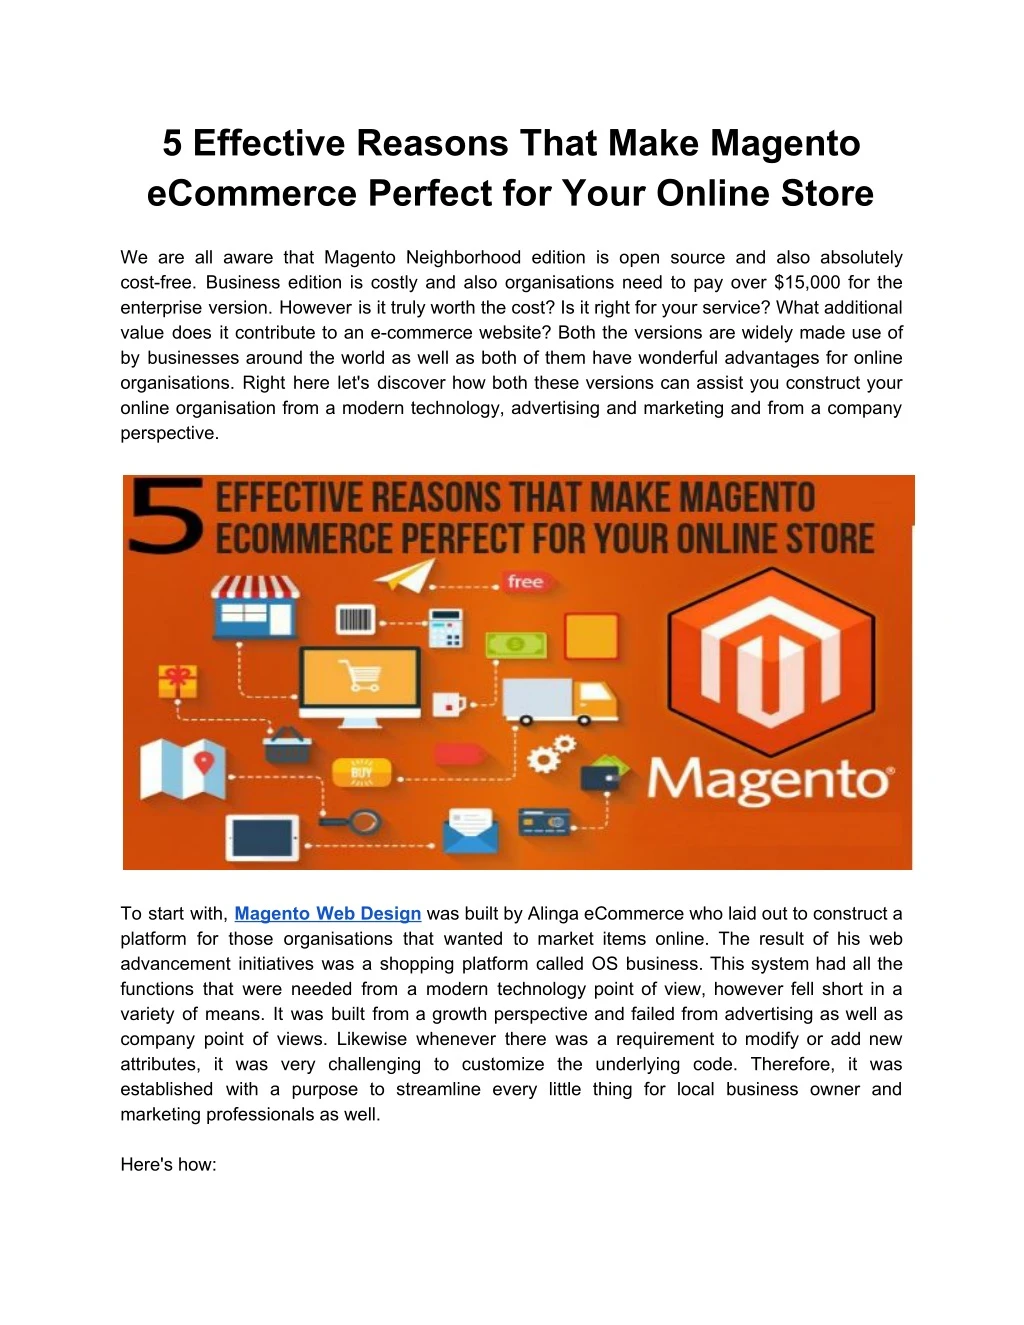 5 effective reasons that make magento ecommerce